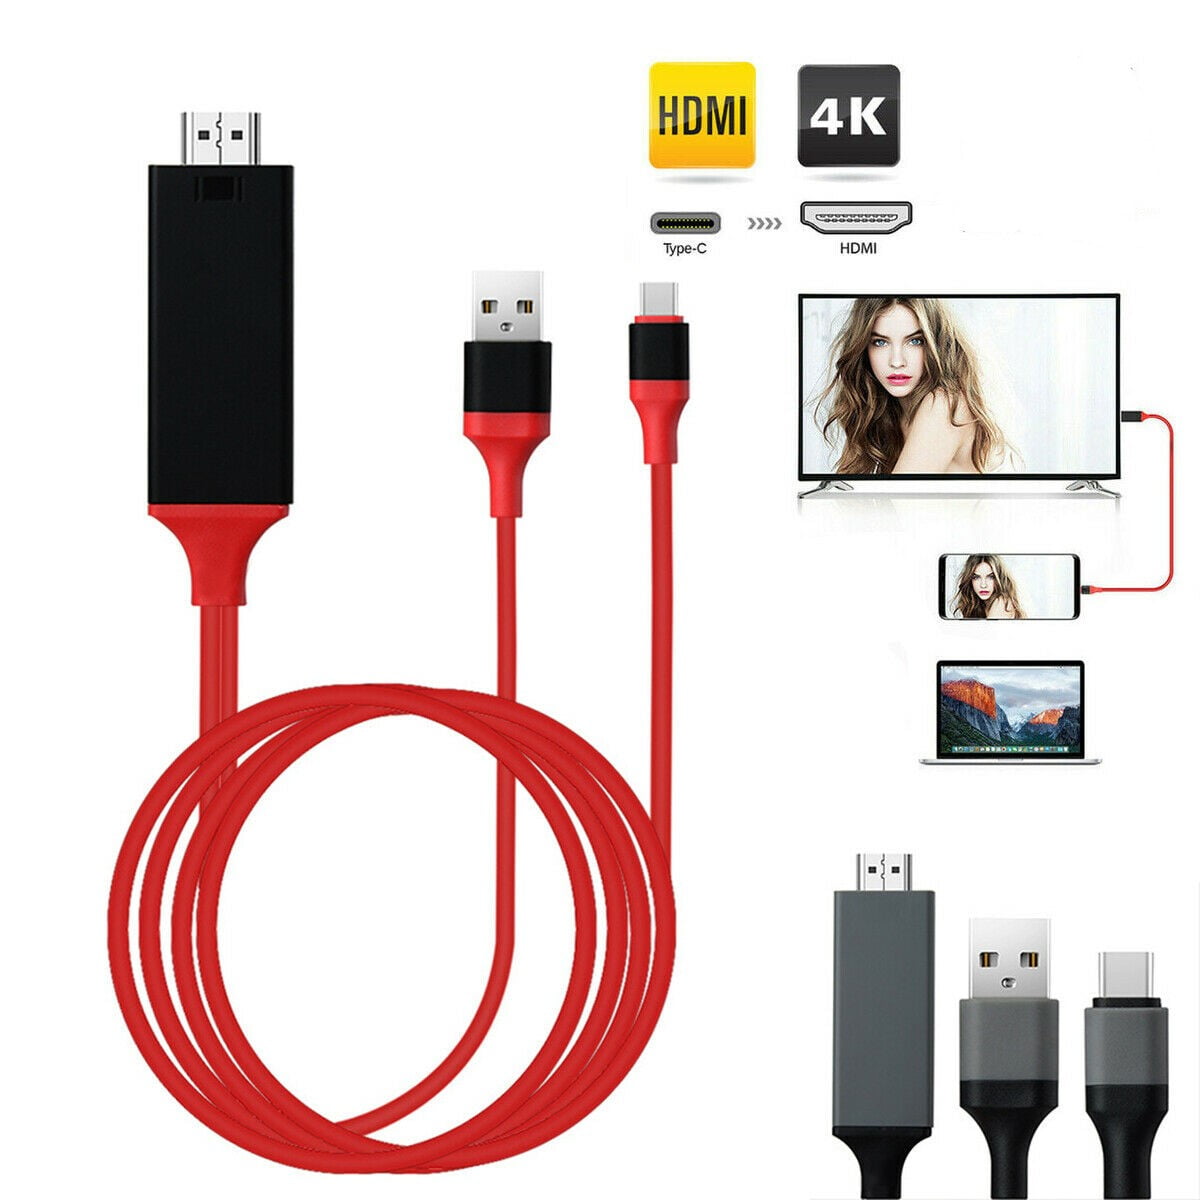 1080P USB HDMI Cable Phone to Digital TV HDTV AV Adapter For iPhone Android  A+